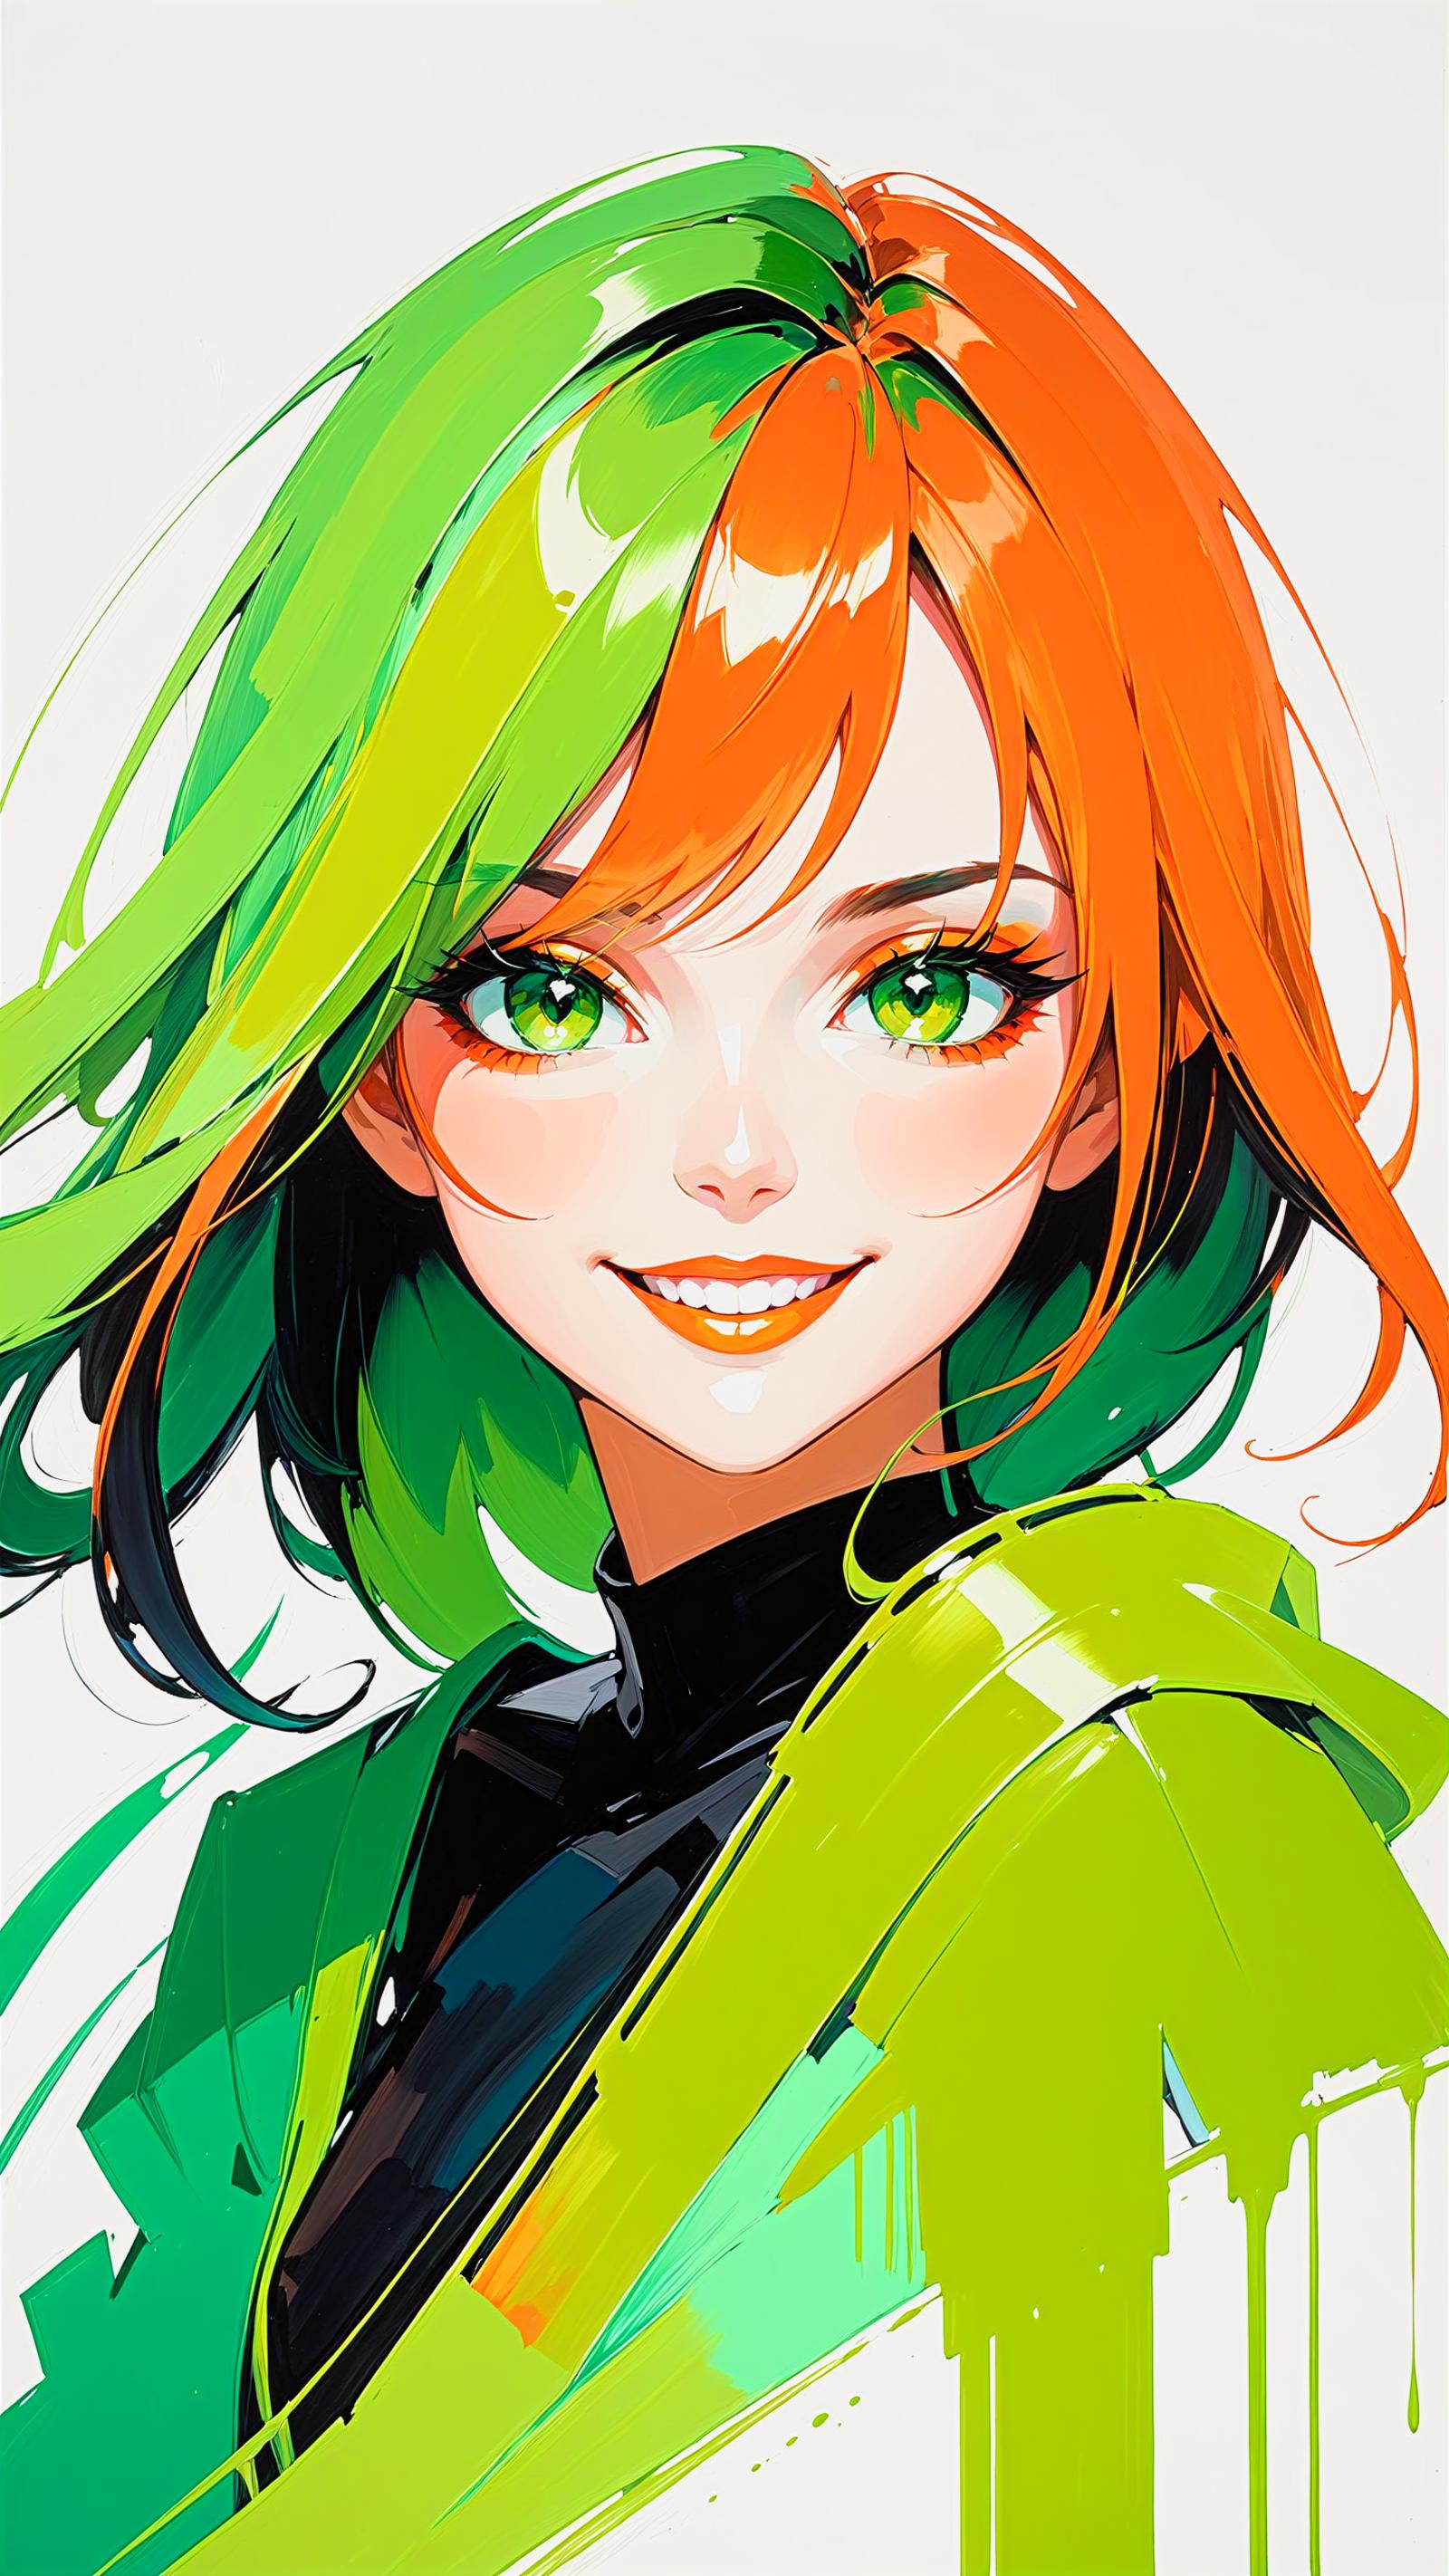 Anime Woman with Green Hair and Green Outfit with a Big Smile